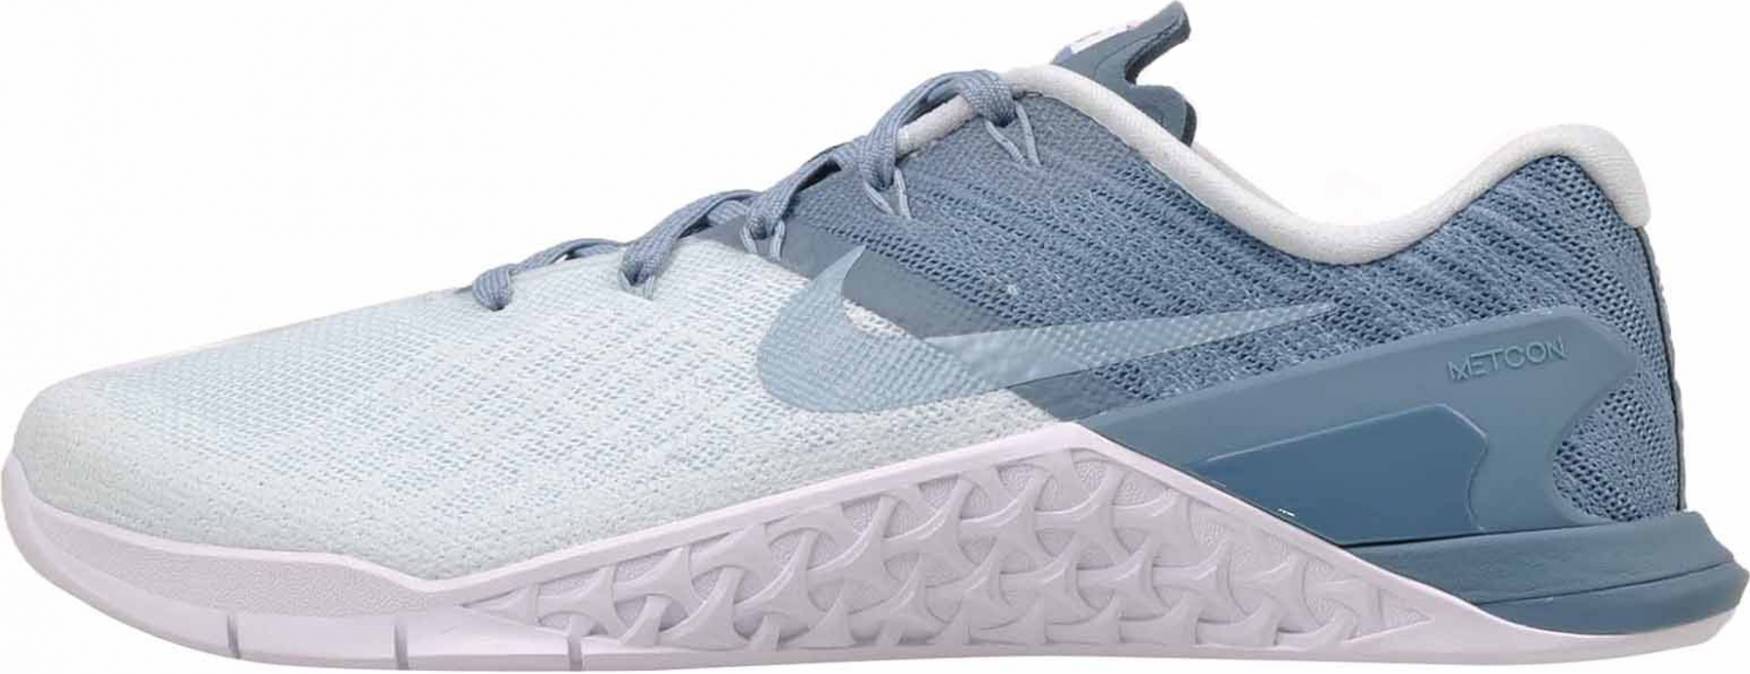 nike metcon 3 rs001rb